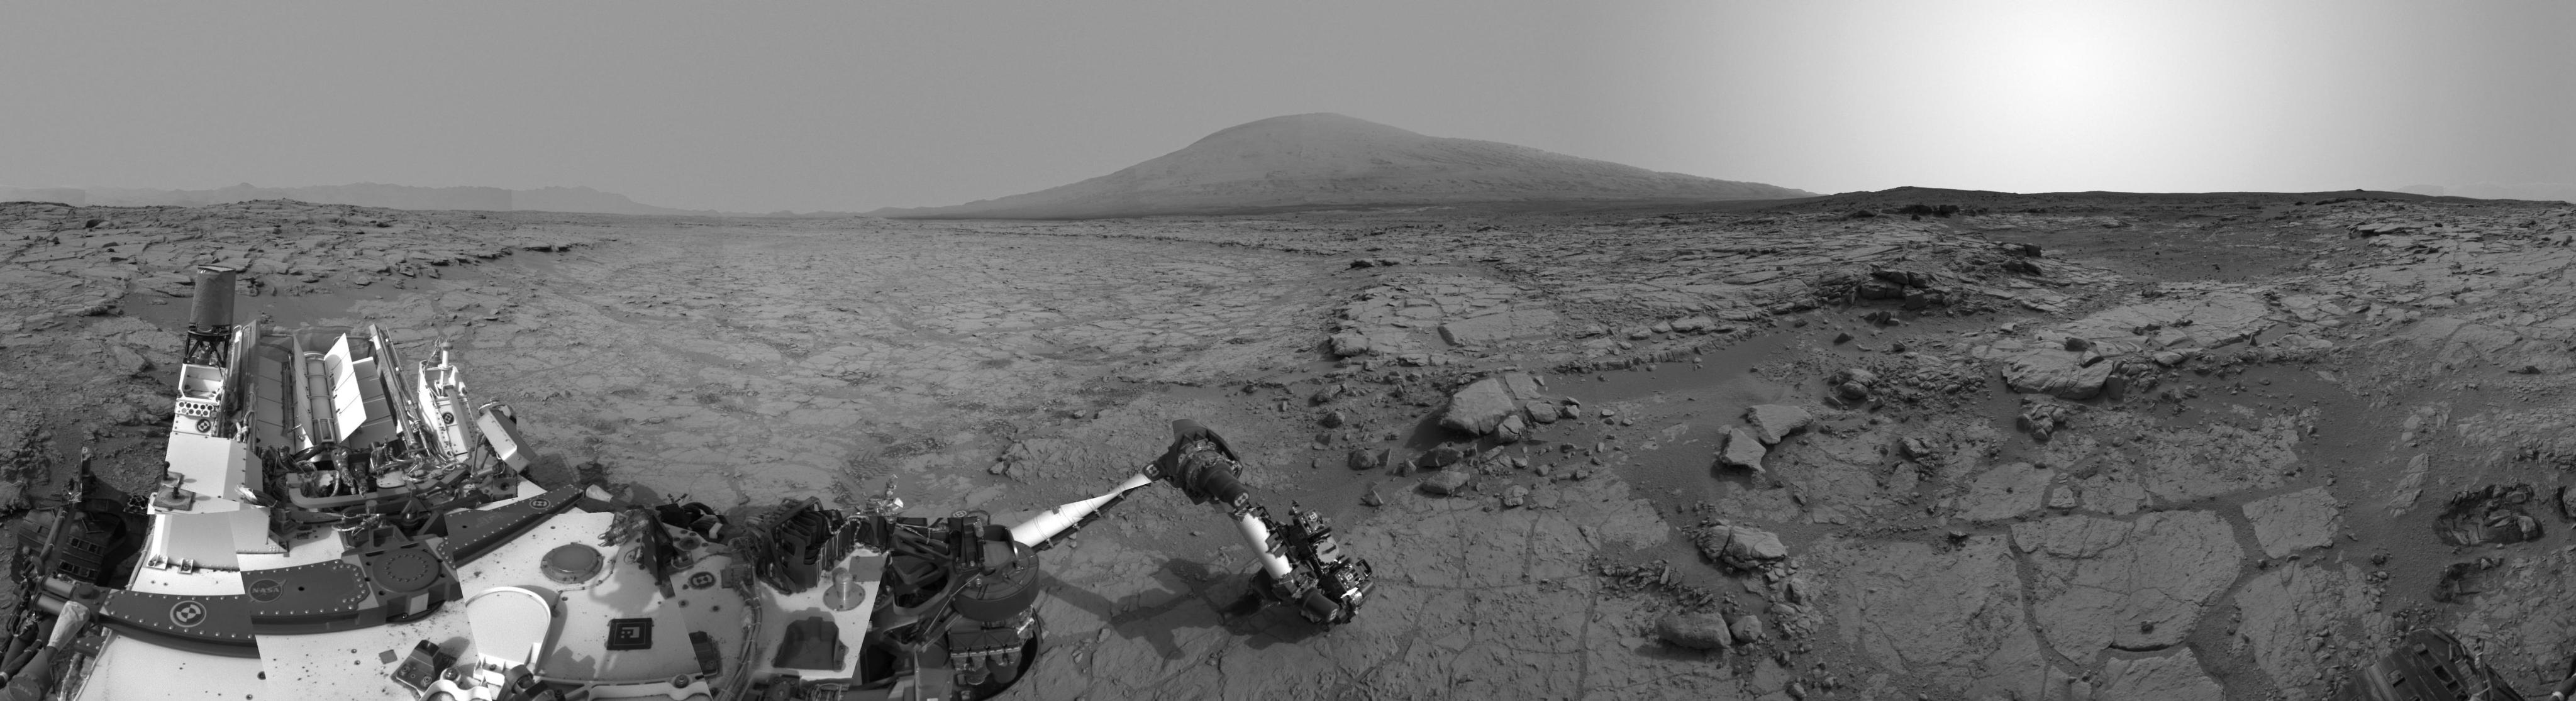 This right-eye member of a stereo pair of images from the Navigation Camera (Navcam) on NASA's Curiosity Mars rover shows a full 360-degree view of the rover's surroundings at the site where it first drilled into a rock.